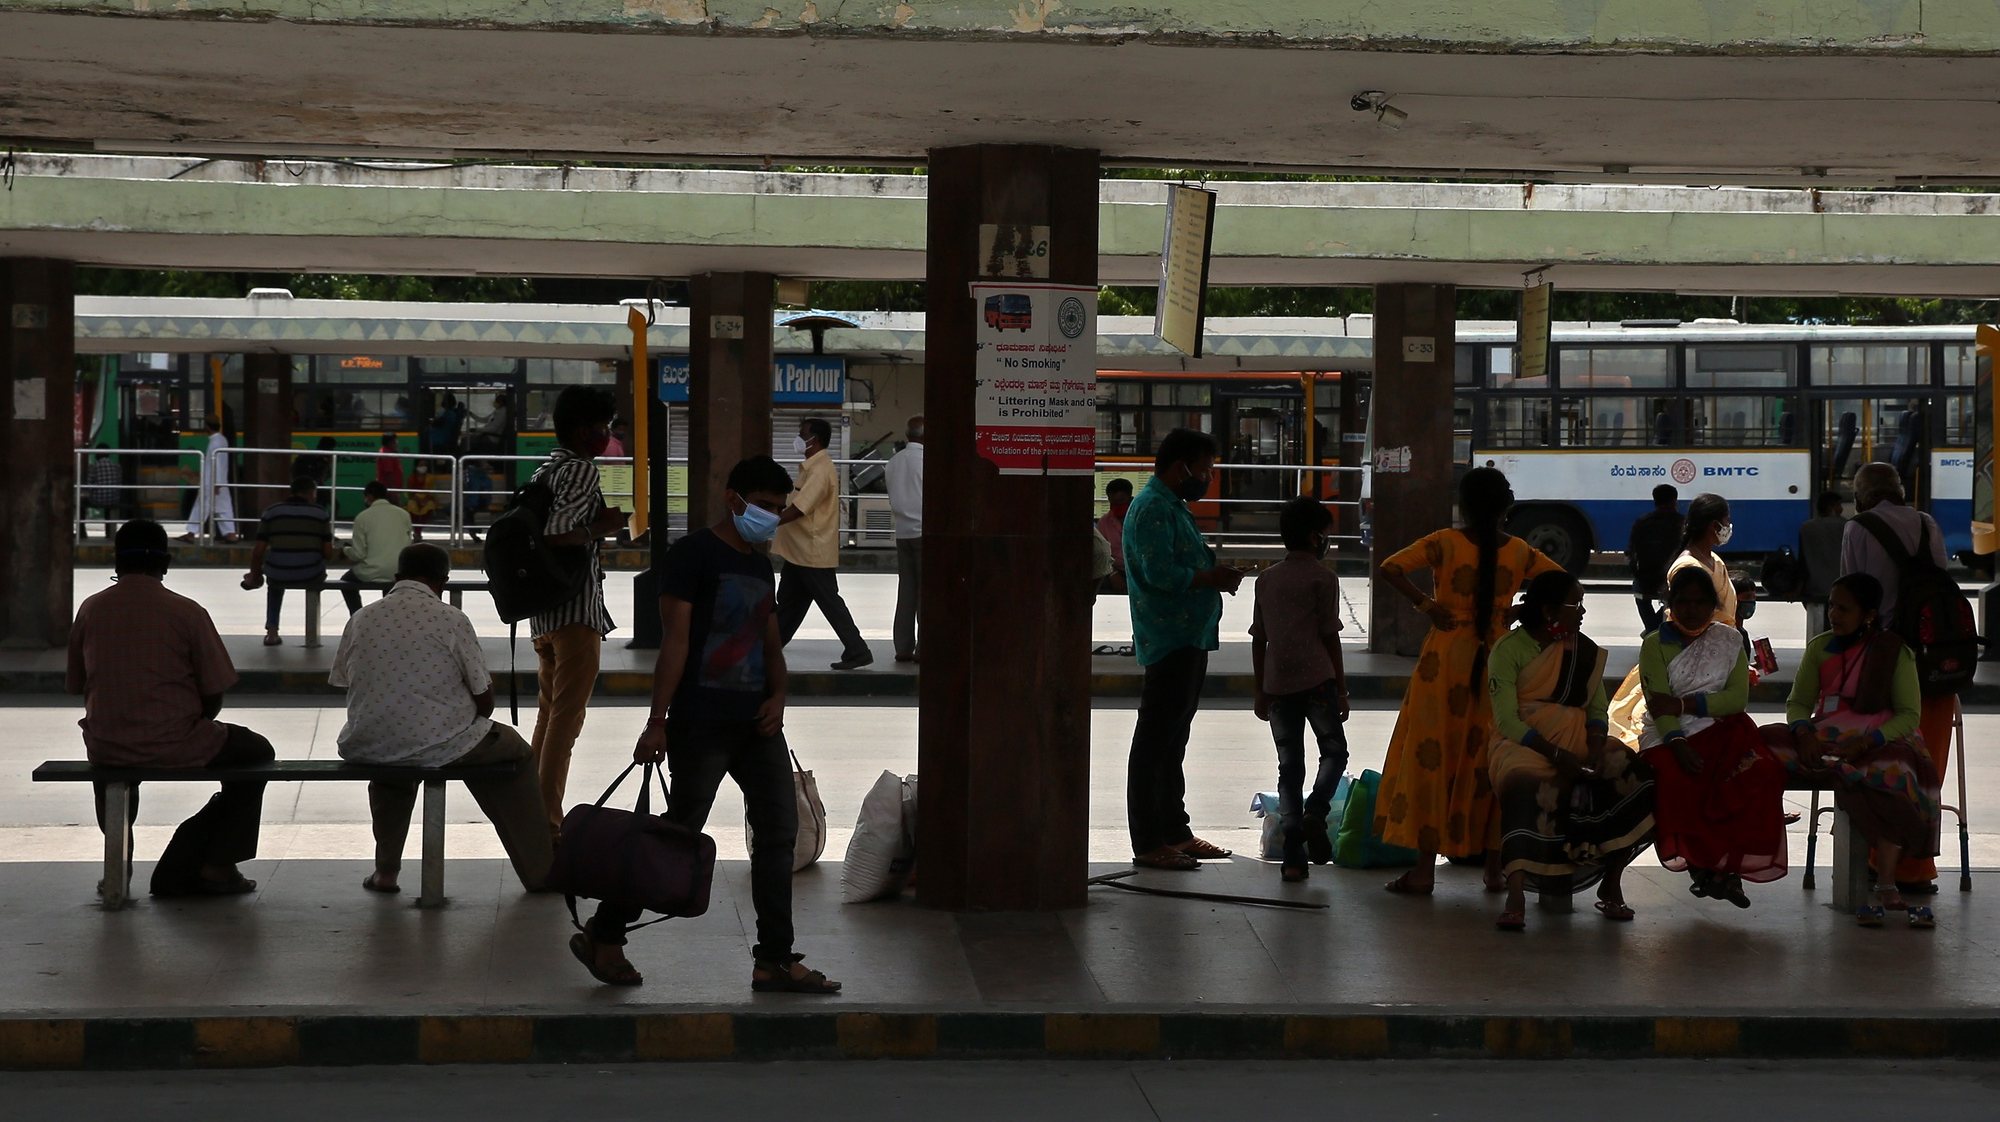 epa09290423 A general view showing people wait for buses at city bus stand, after the lockdown restrictions eased in Bangalore, India, 21 June 2021. The Karnataka State government has eased coronavirus restrictions in several districts and imposed night curfew will be in effect from 7pm to 5am in all other districts and weekend curfew will be imposed in Bangalore city.  EPA/JAGADEESH NV